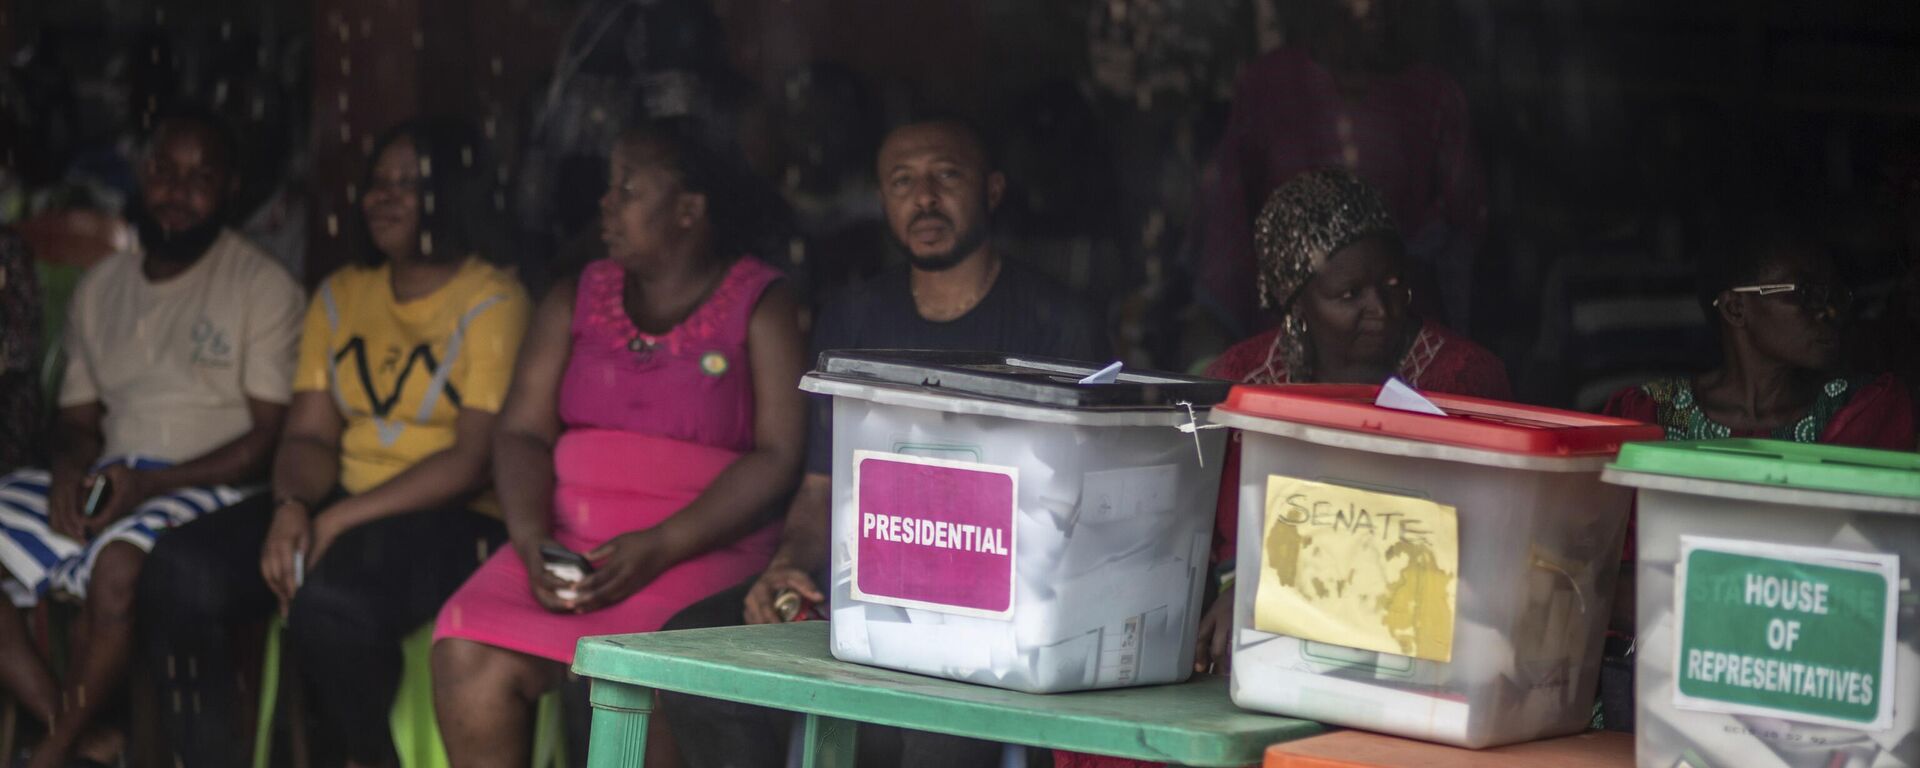 People sit in line next to the ballot boxes displayed on the tables, as they wait to cast their votes at a polling station during the presidential elections in Agulu, Nigeria, Saturday, Feb. 25, 2023.  - Sputnik International, 1920, 26.02.2023